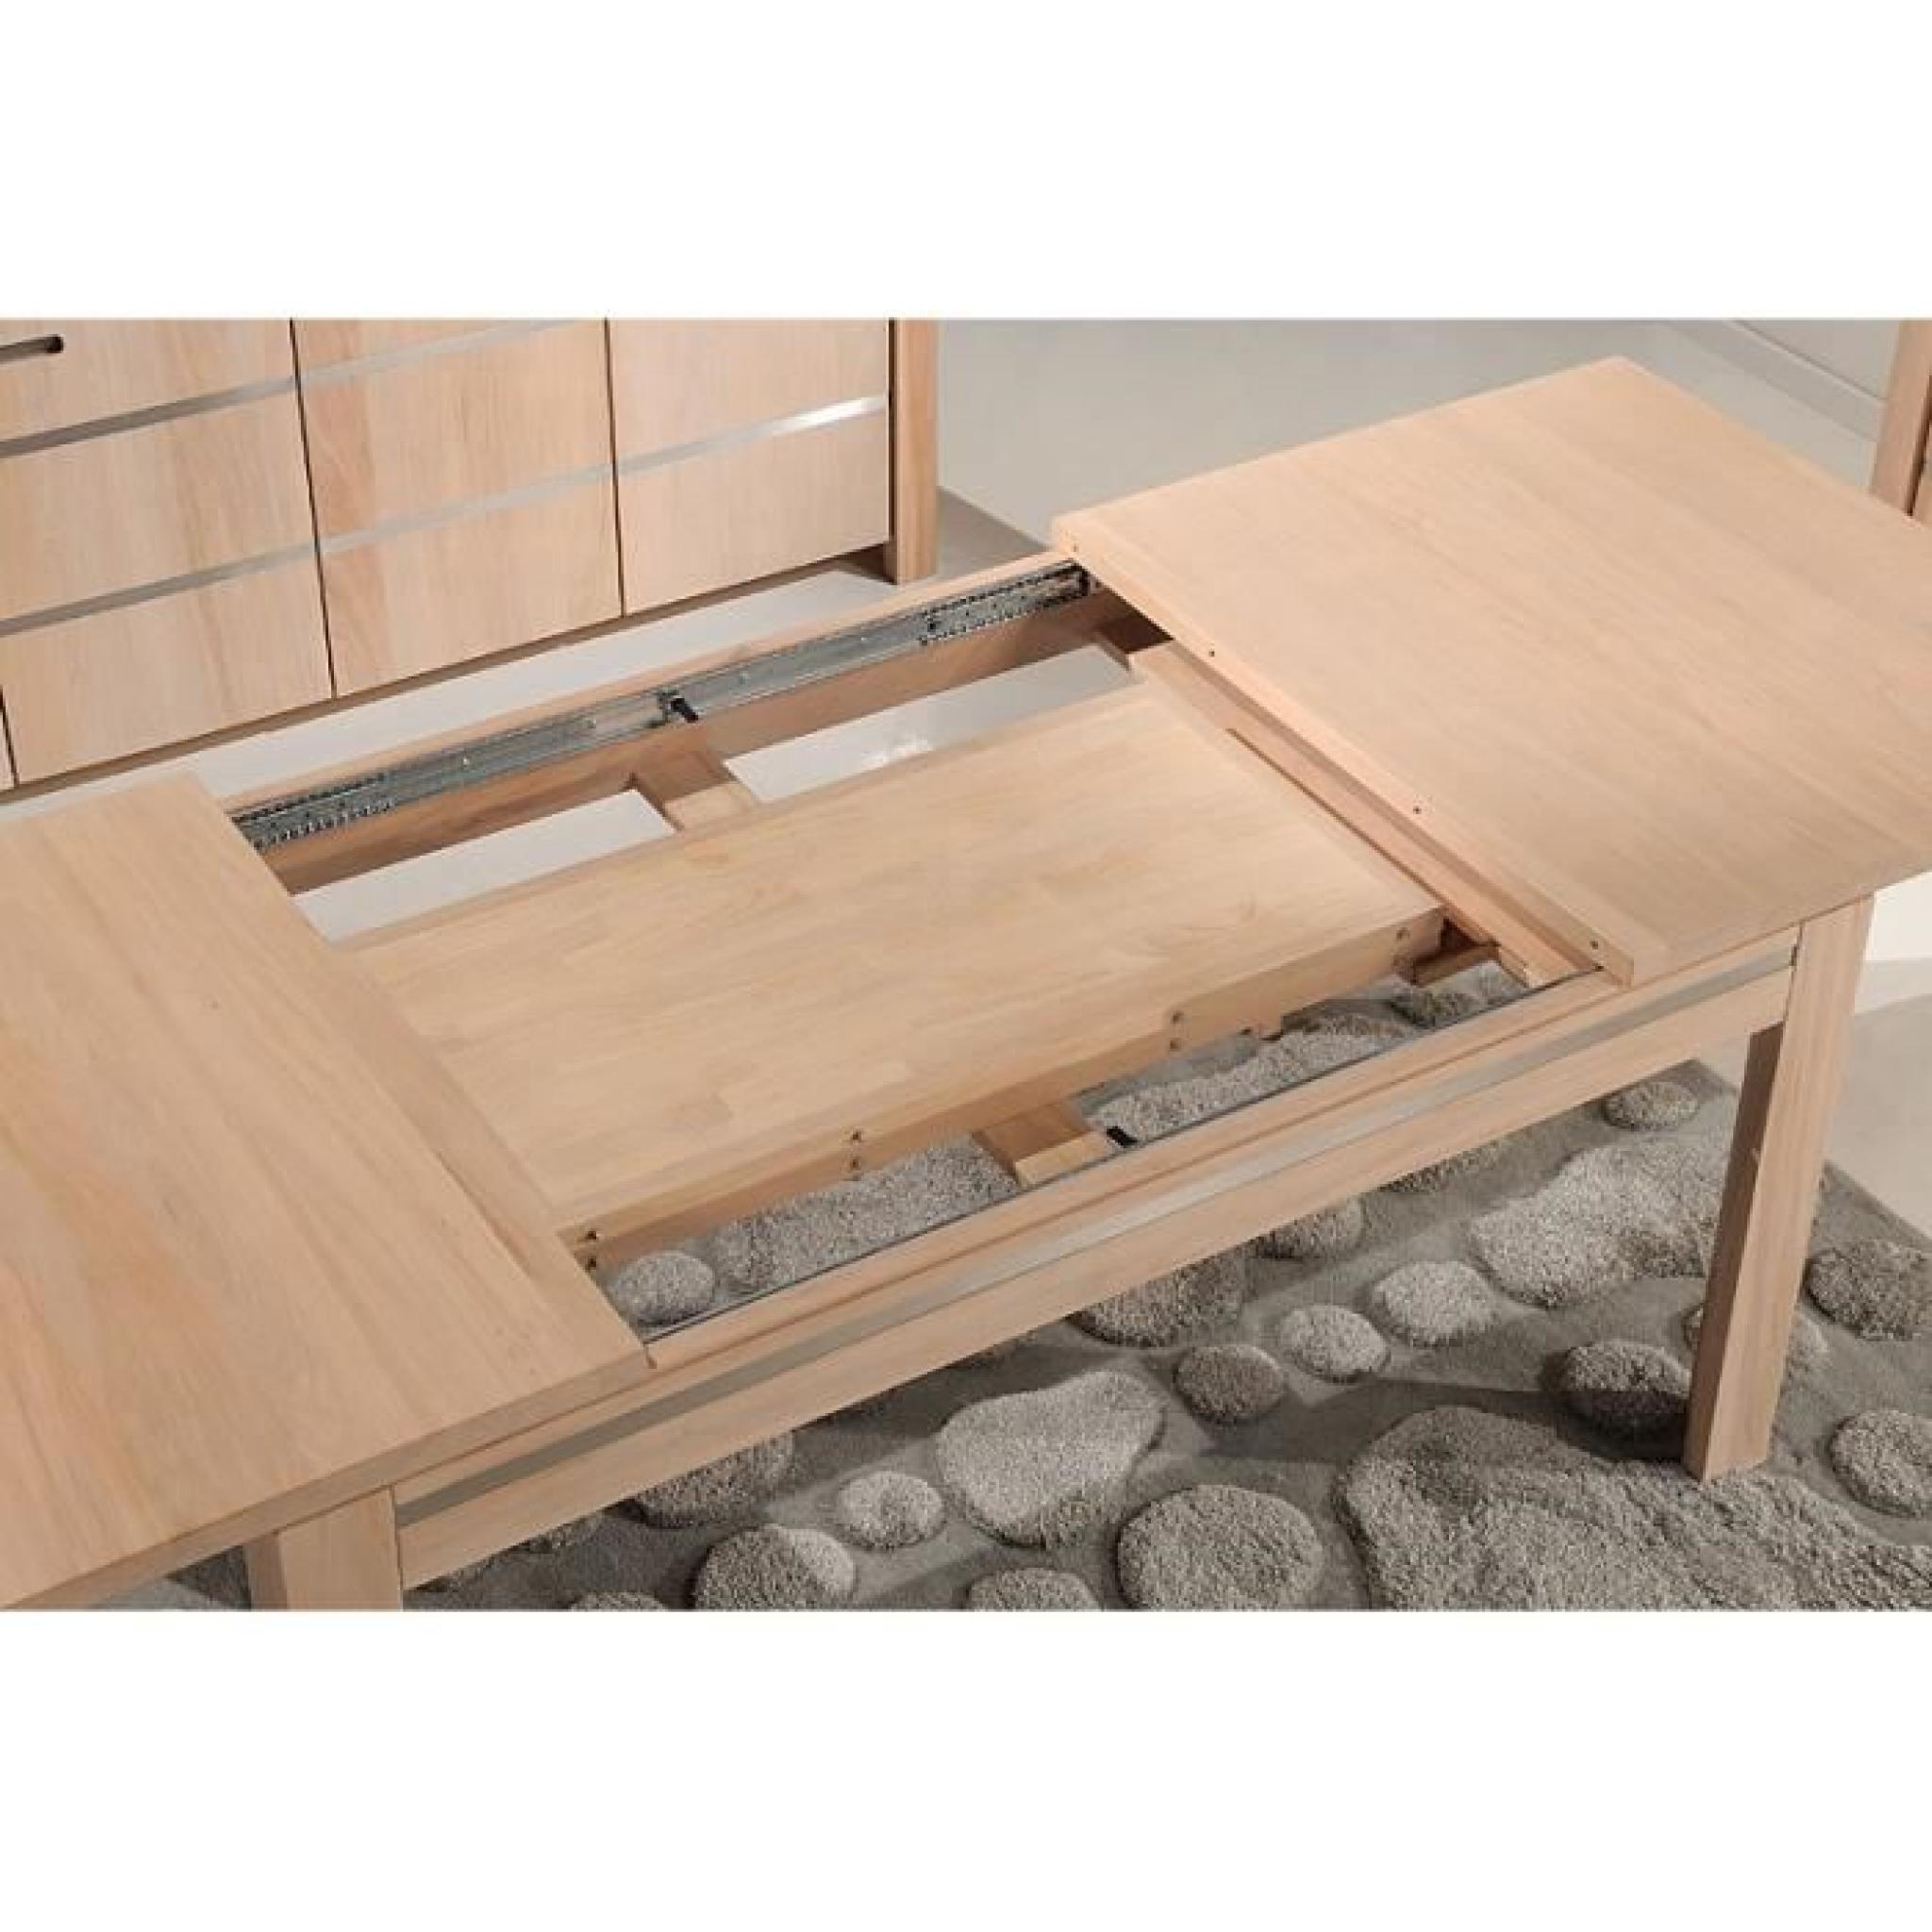 Table OPALE 160/95 ORME MASSIF-INOX (Orme - Orme - Wengé) pas cher